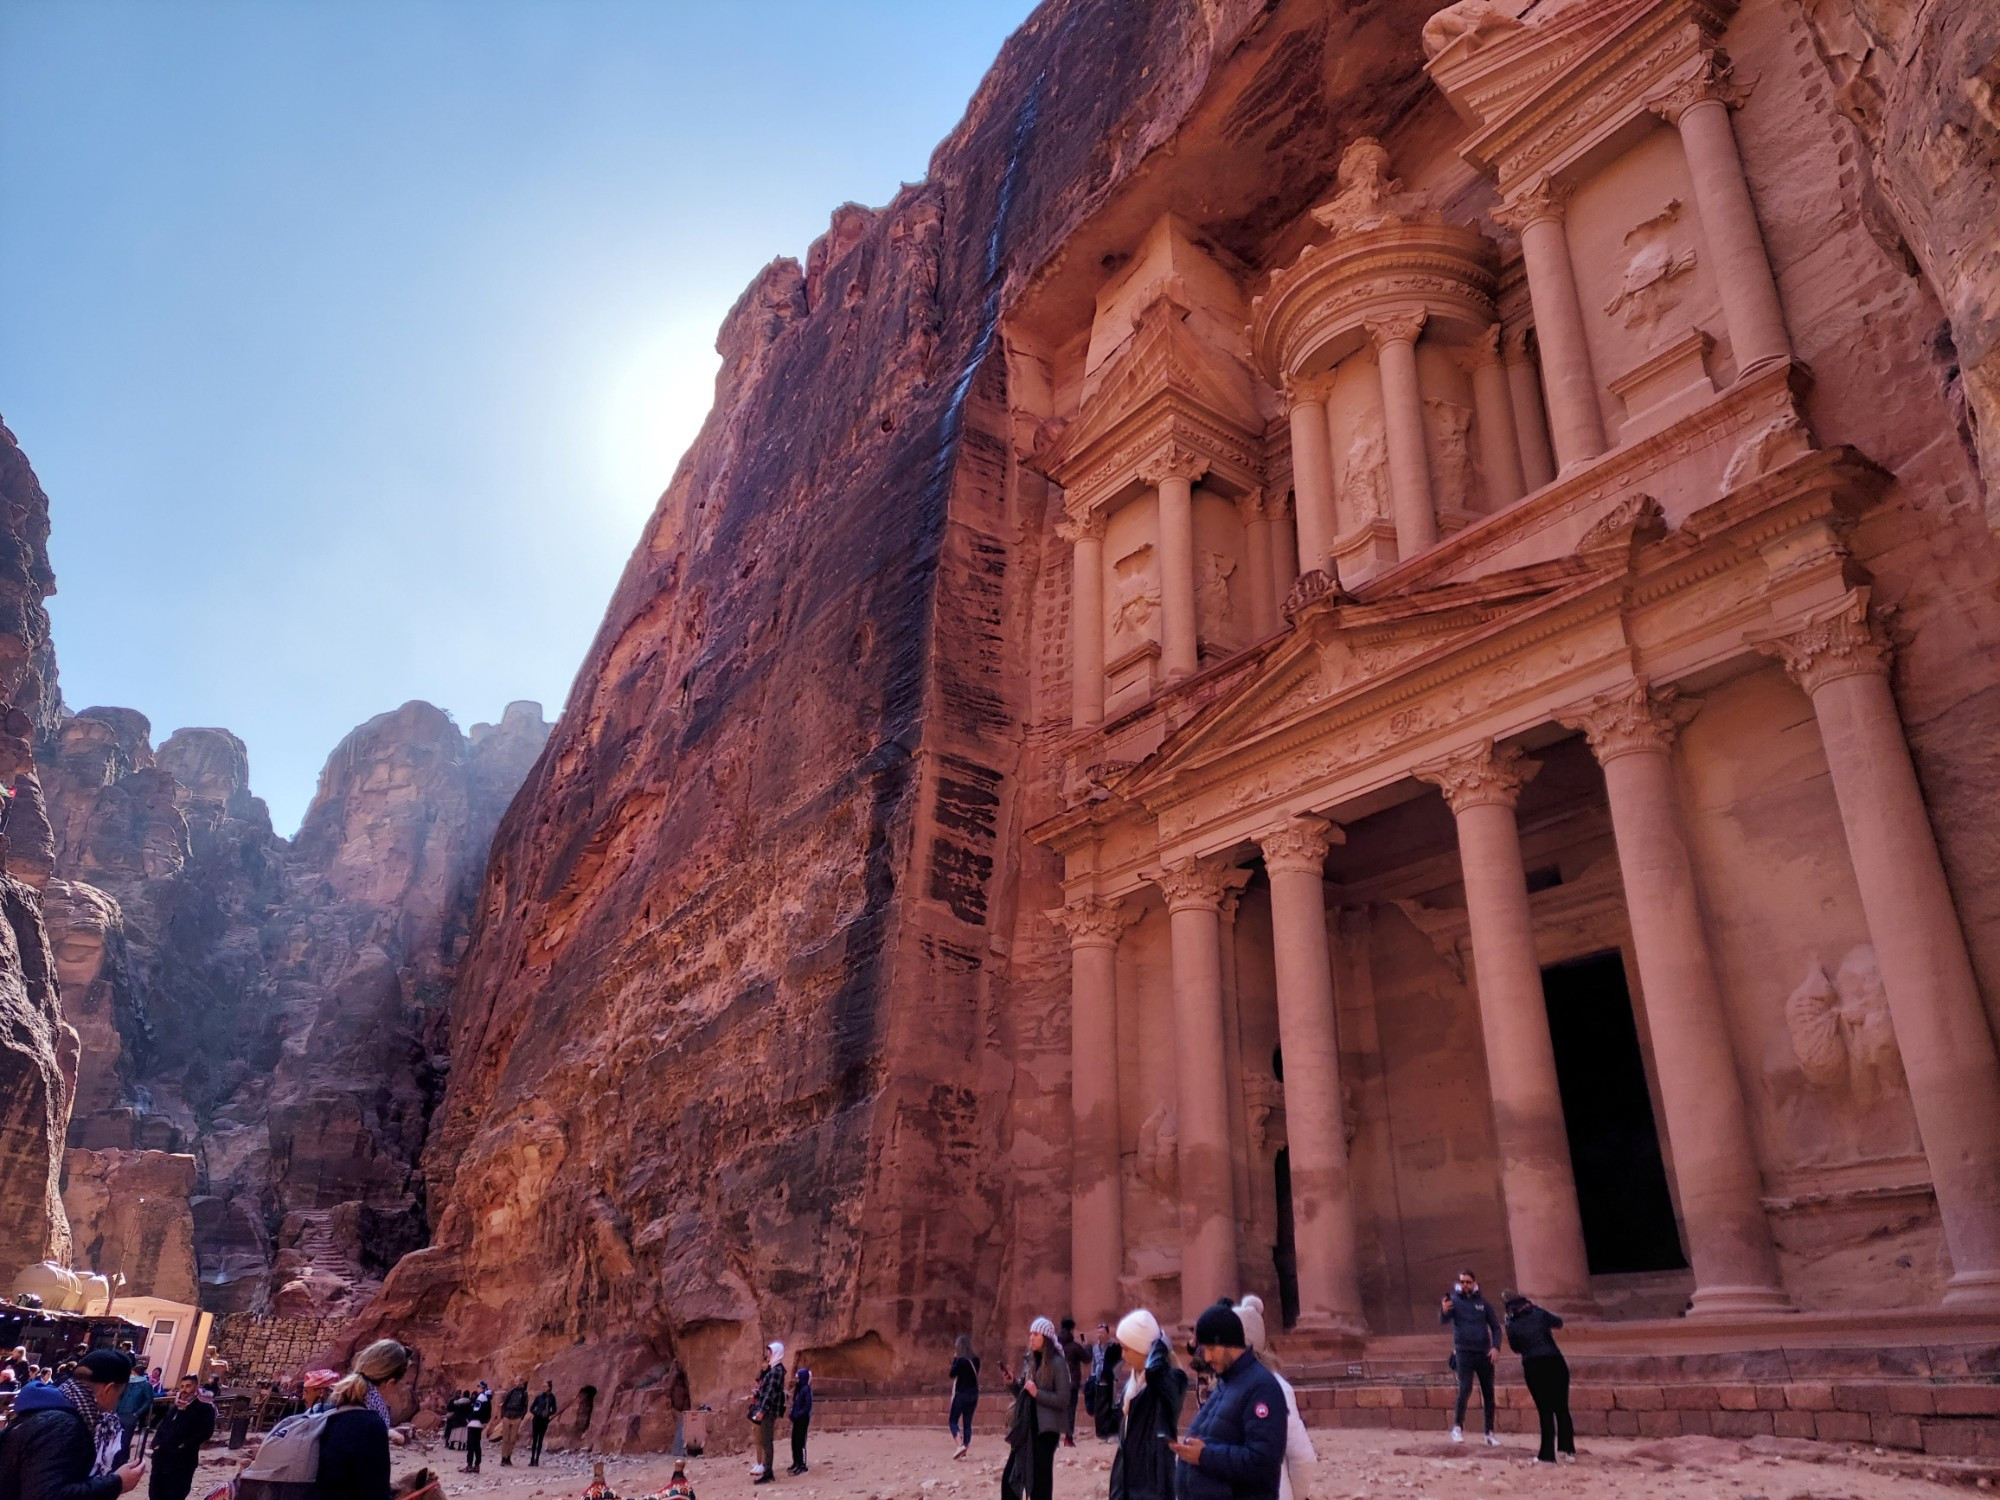 The Treasury — a temple carved into red sandstone cliffs by the ancient Nabataen Kingdom in the Jordanian desert, in Petra, Jordan